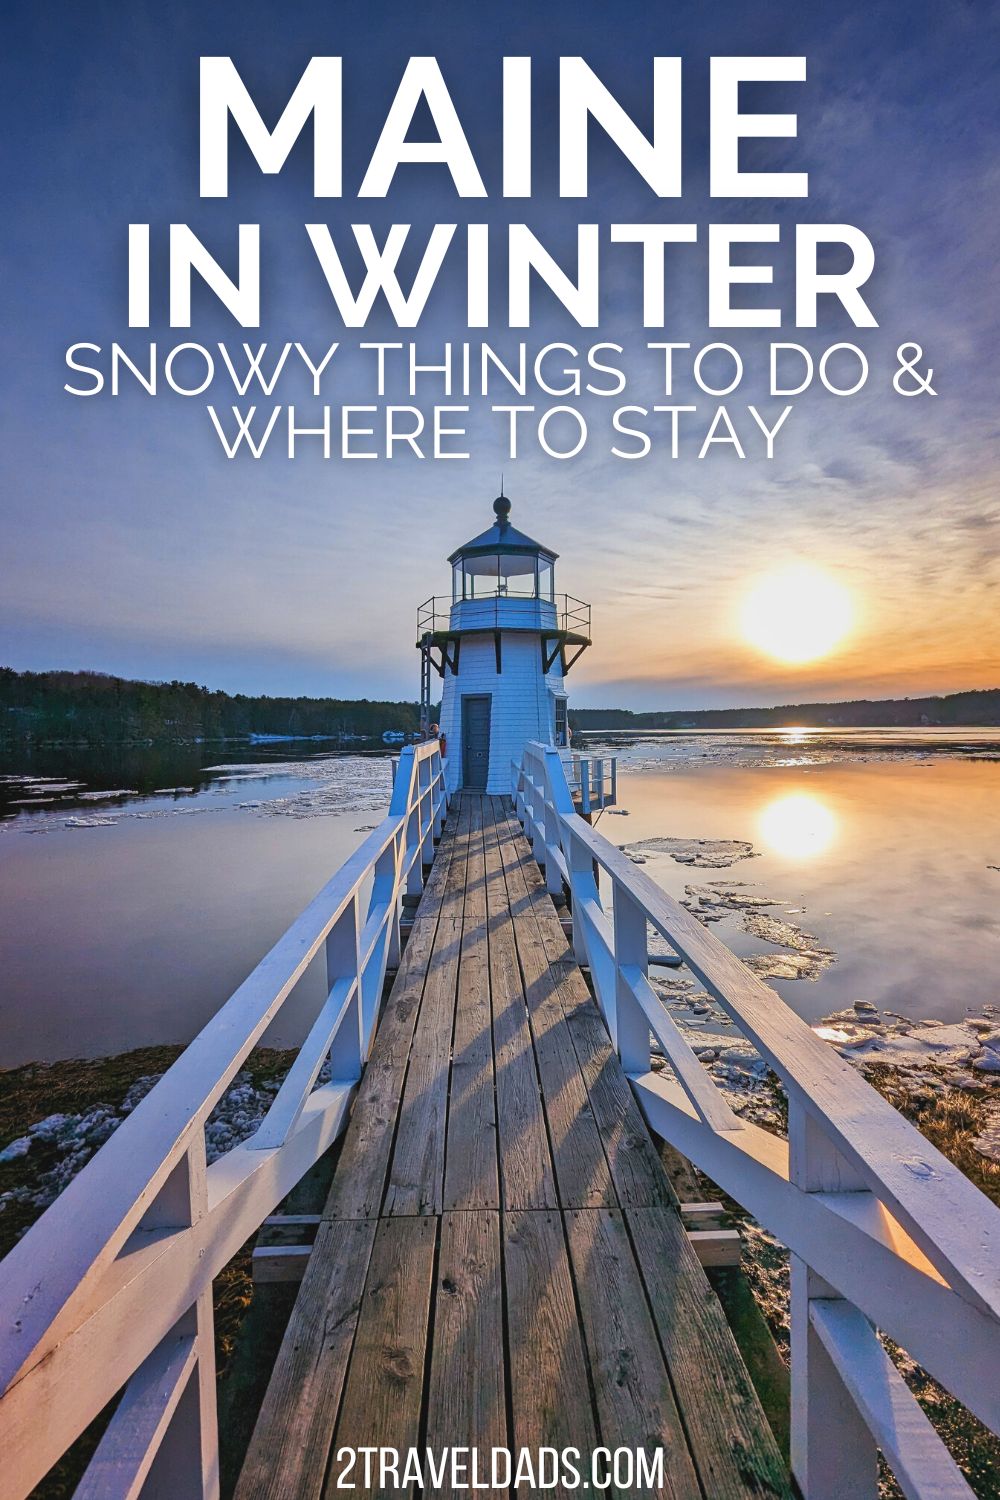 If you love snow, good food and the coastal vibe, visiting Maine in winter is for you! This guide to off-season travel to Portland and Midcoast Maine is ideal for enjoying the outdoors, museums and lighthouses along the coast. Recommendations for where to stay and how to plan a winter trip to Maine.